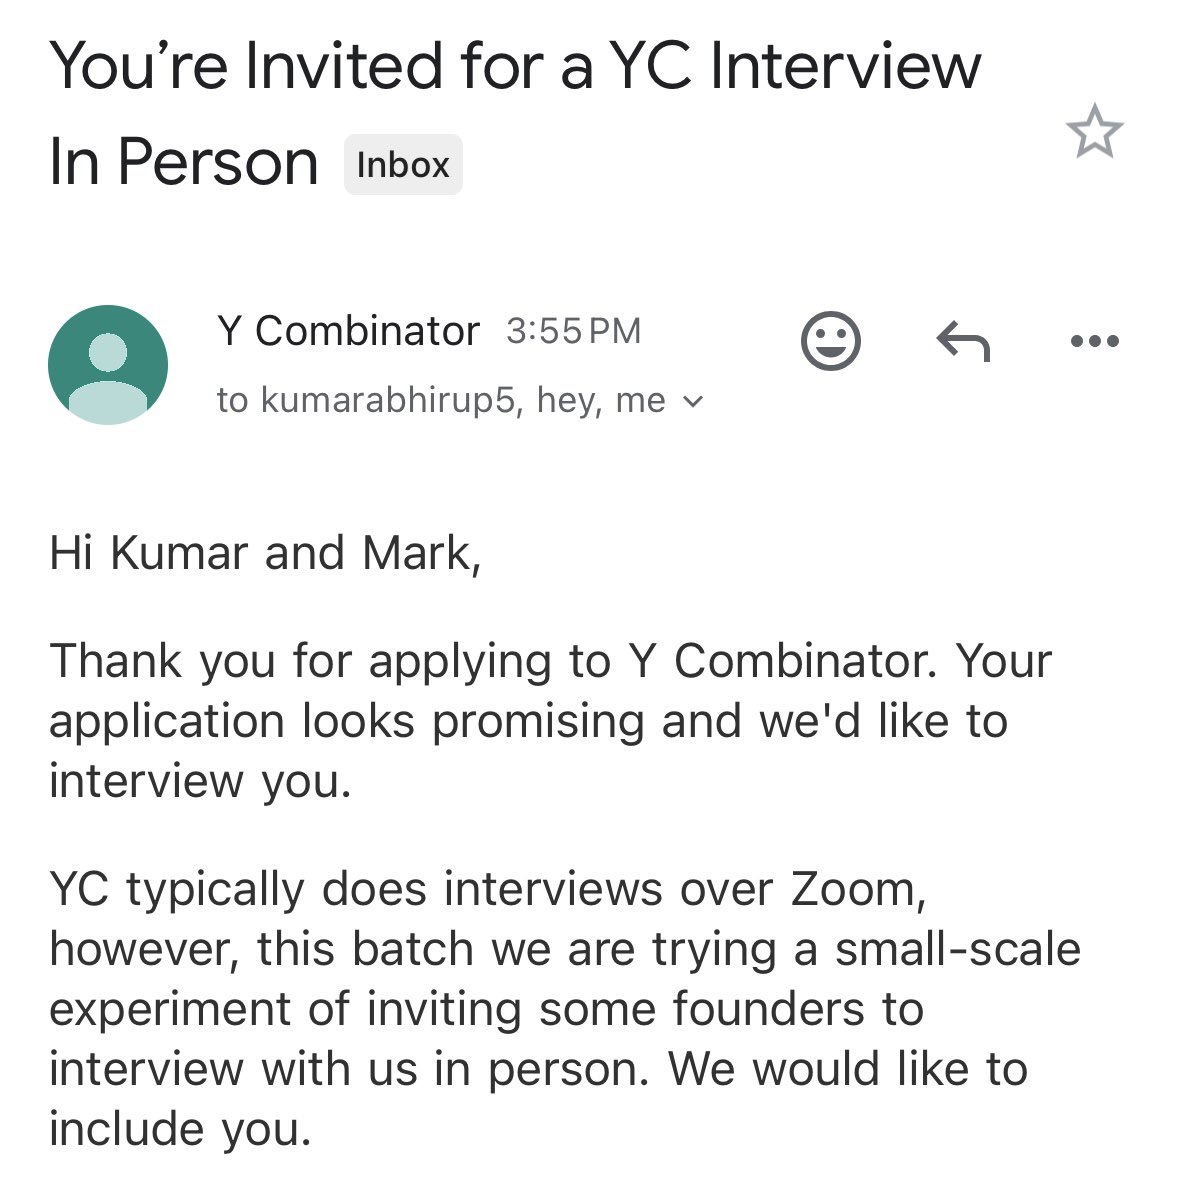 Excited to interview with @ycombinator partners with @kumareth next week!